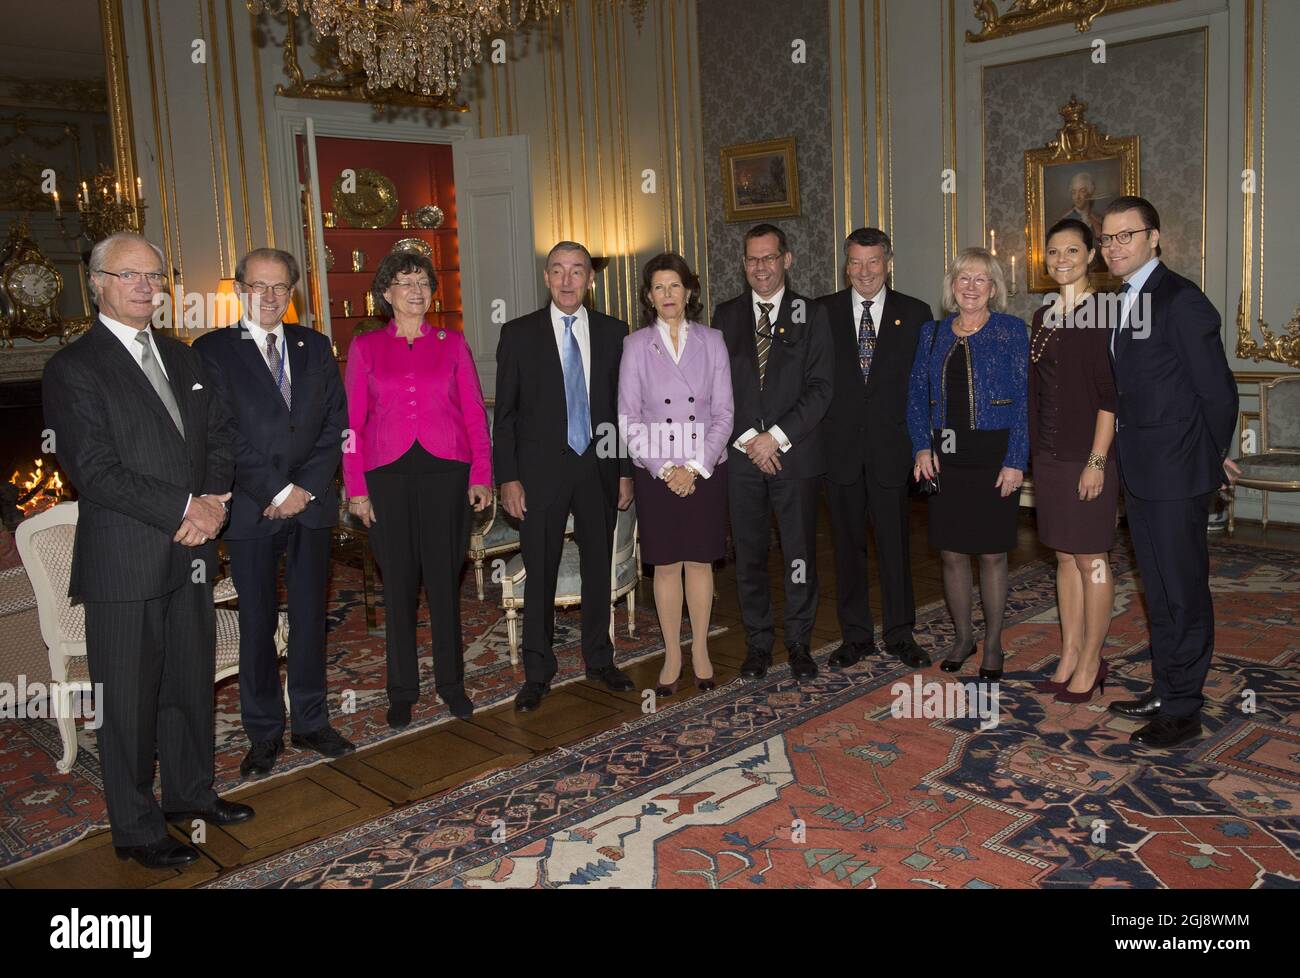 STOCKHOLM 20141118 King Carl Gustaf, Queen Silvia, Crown Princess Victoria and Prince Daniel held a lunch for the former Speaker of the Riksdag, Per Westerberg, first Deputy Susanne Eberstein, chamber Magistracy Hans Eberstein, second deputy Ulf Holm and third deputy Jan Ertsborn with his wife Ulla at the Royal Palace in Stockholm. Foto: Fredrik Sandberg / TT / Kod 10080  Stock Photo